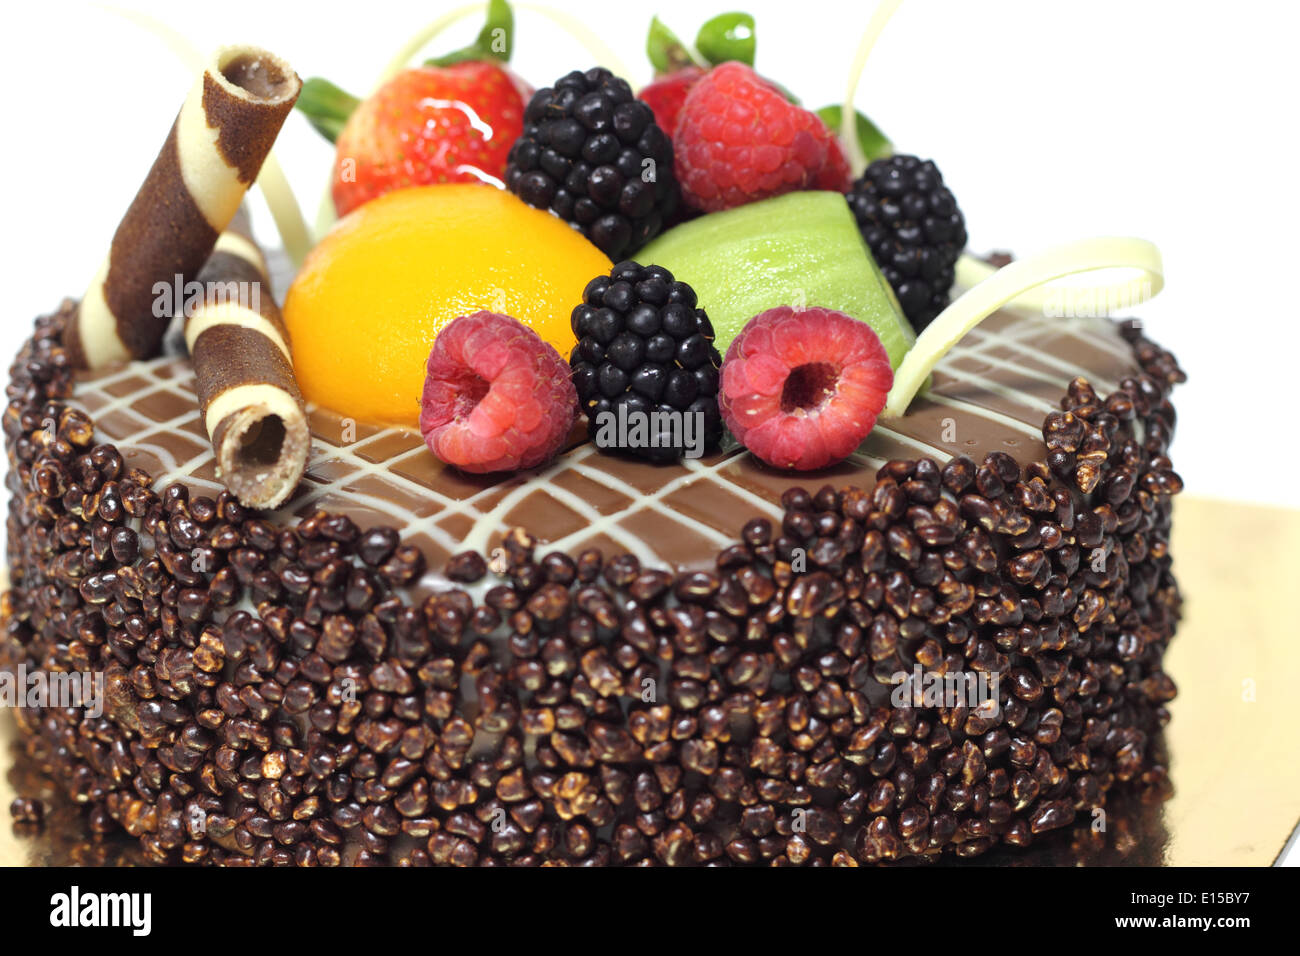 a Delicious chocolate strawberry cake with chocolate ganache. Stock Photo